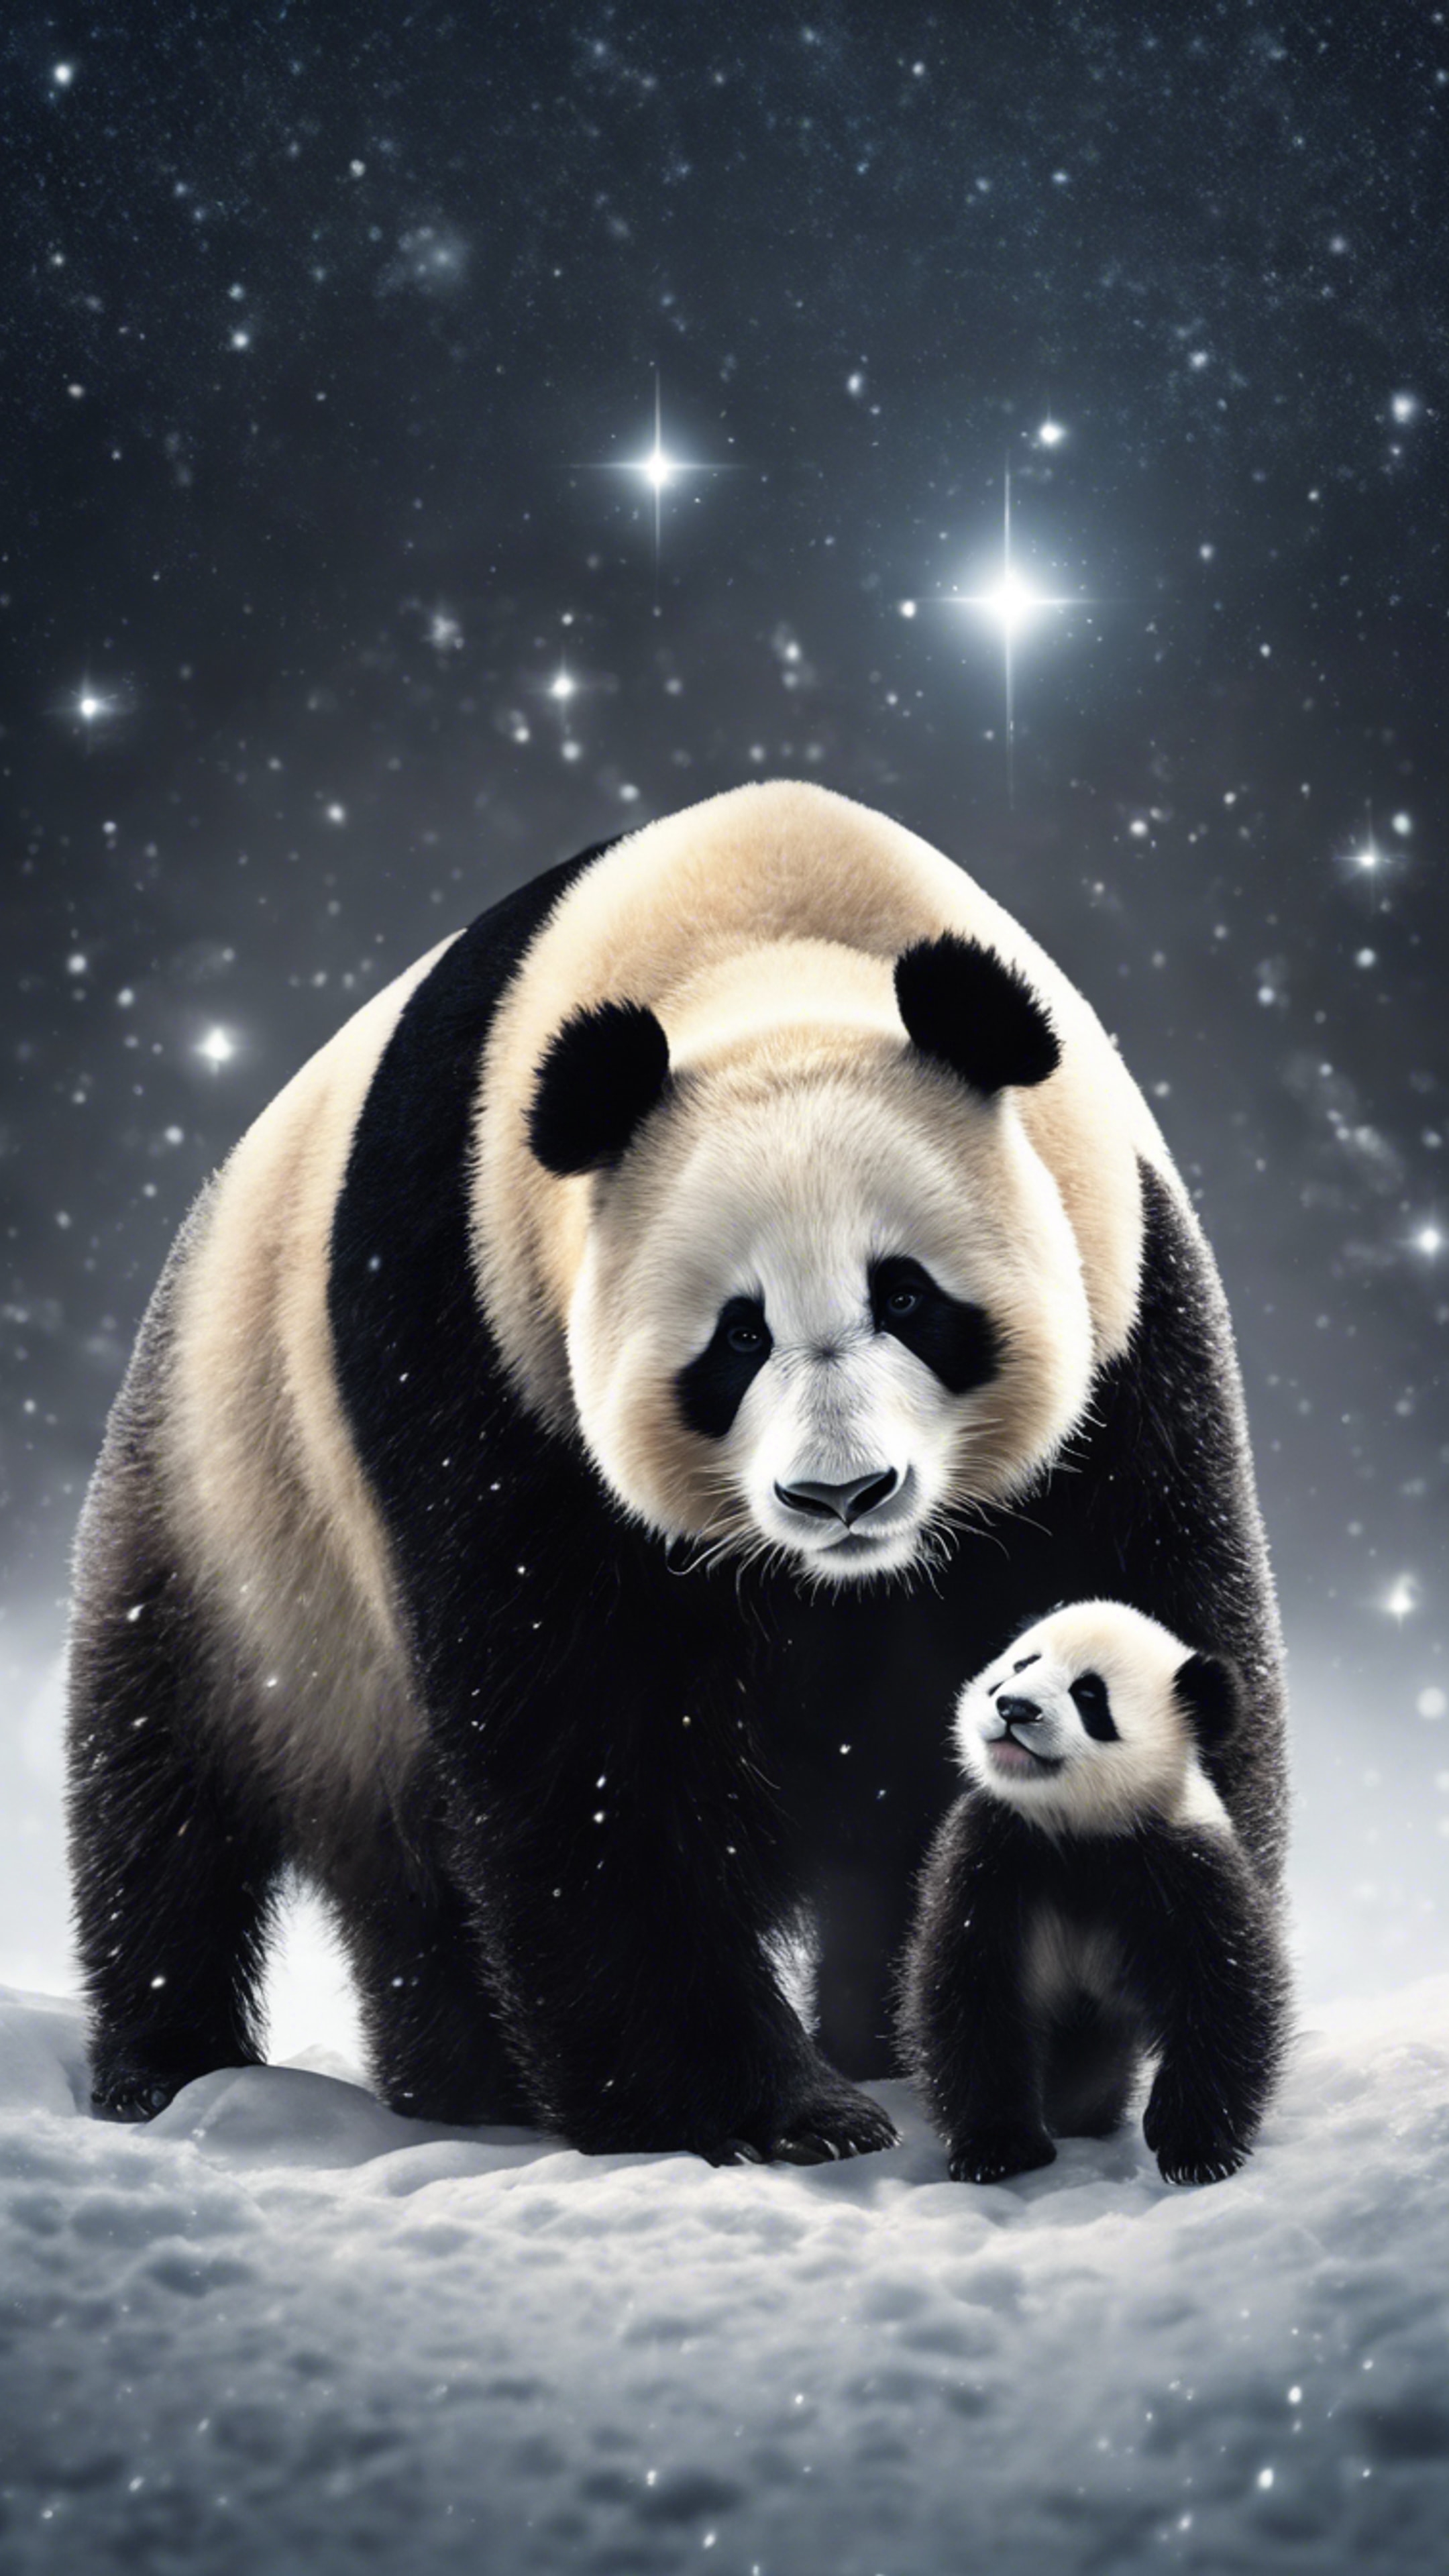 A mother panda with her cubs, peacefully taking a stroll on a silent, snowy night under a blanket of stars. Tapeta[875b5ef660eb48ddb691]